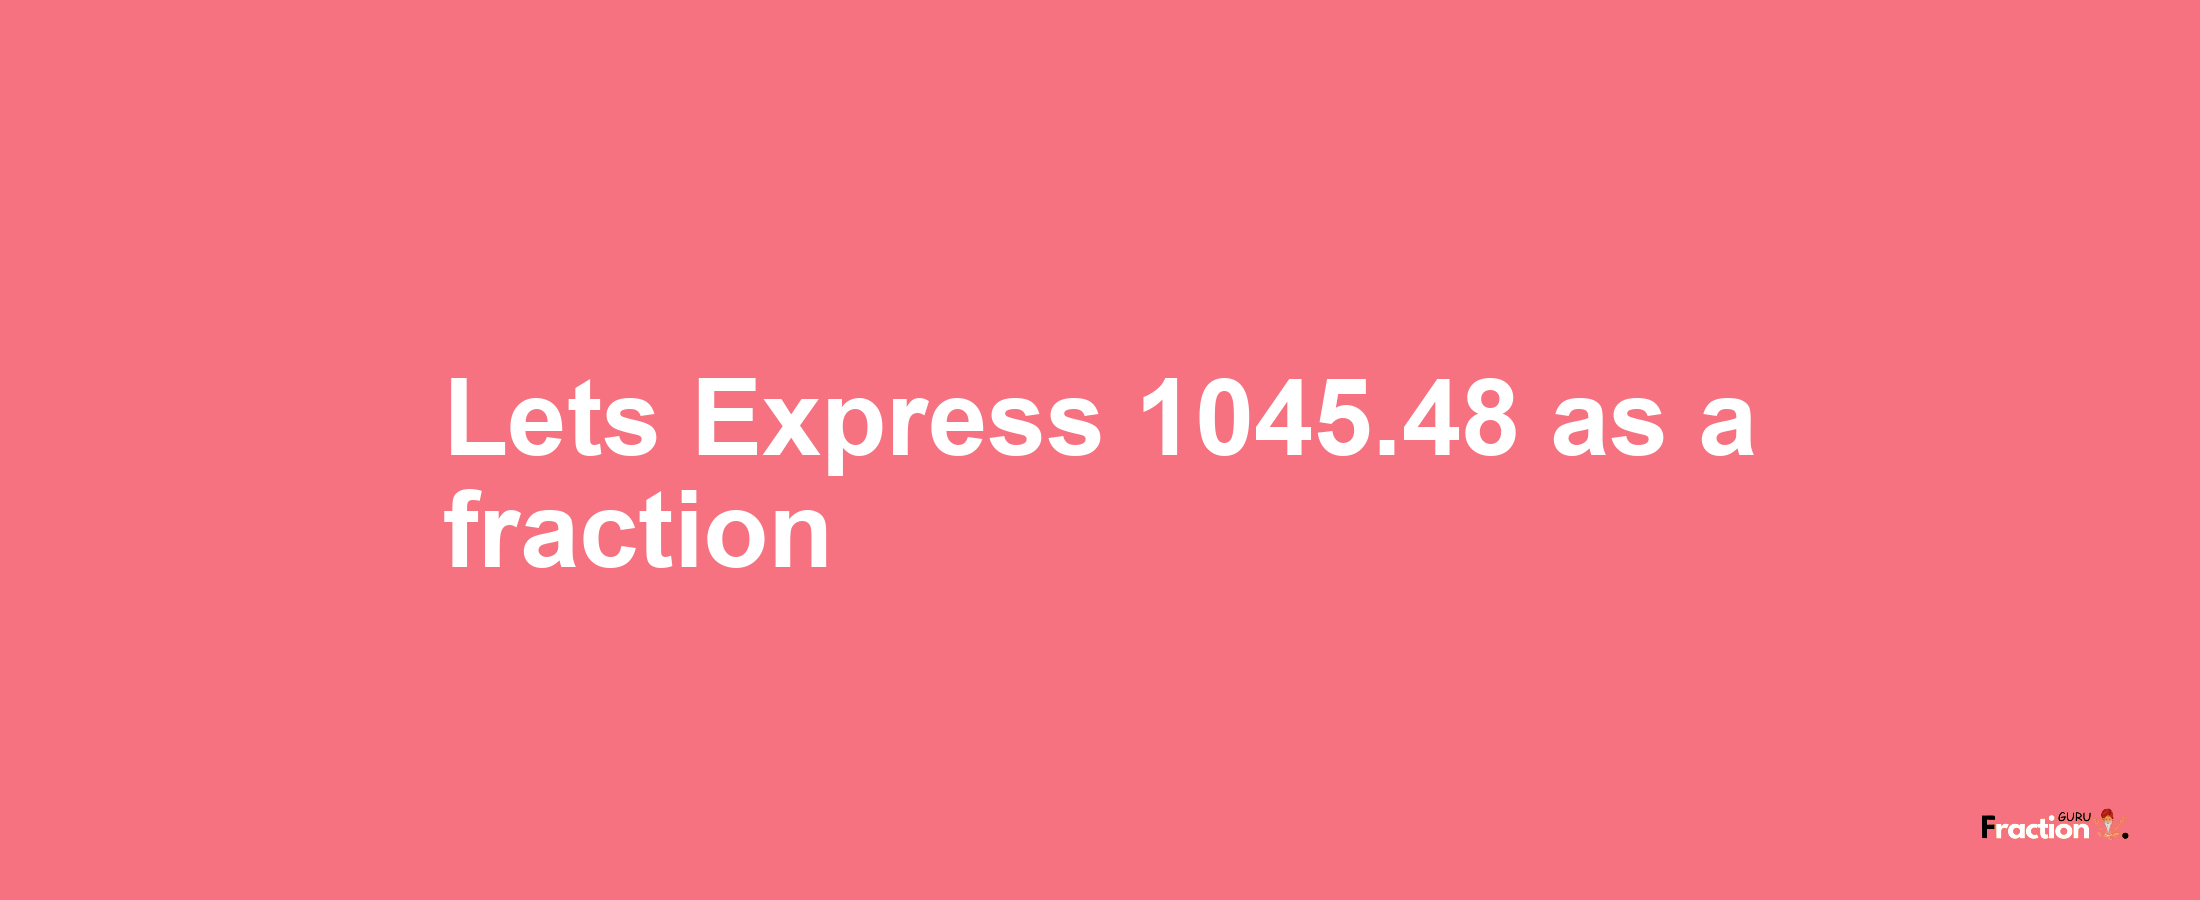 Lets Express 1045.48 as afraction